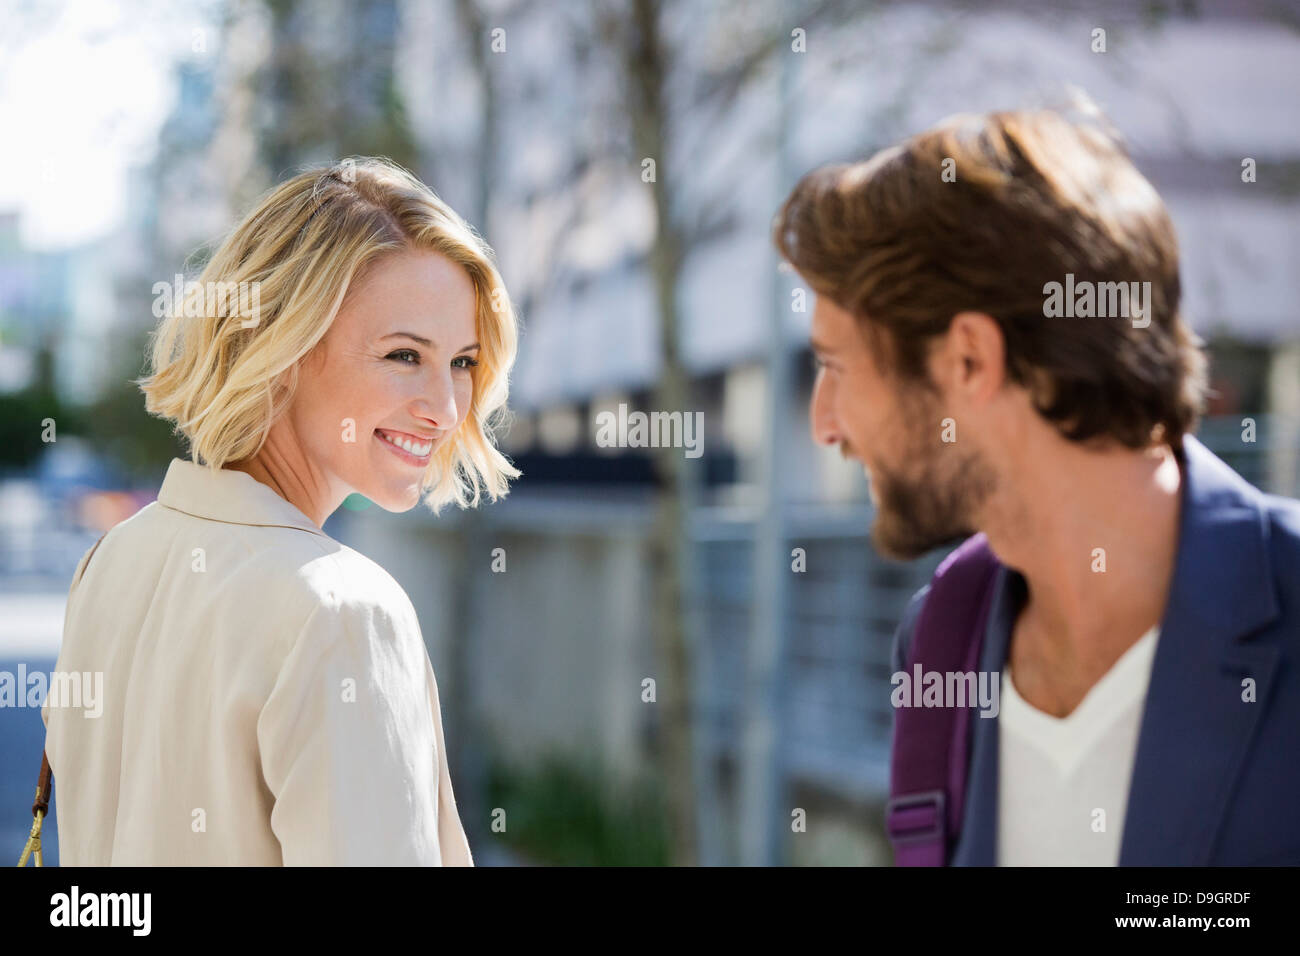 Man and woman smiling at each other Stock Photo - Alamy